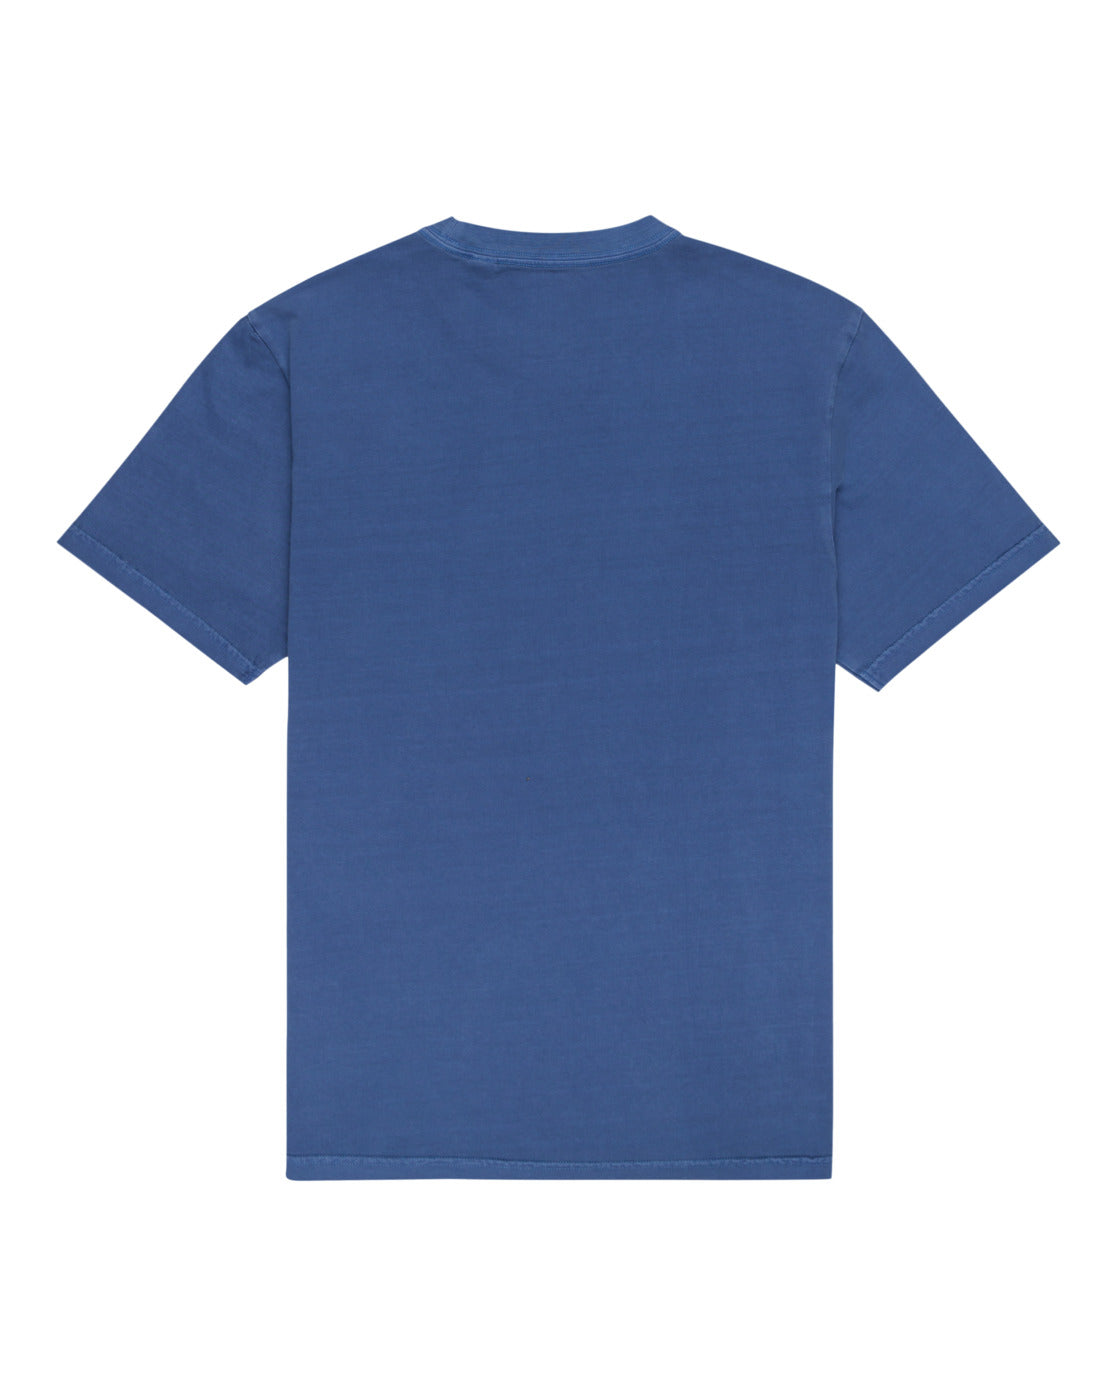 ELEMENT - BASIC POCKET LABEL SS YOUTH TEE - NOUVEAN NAVY